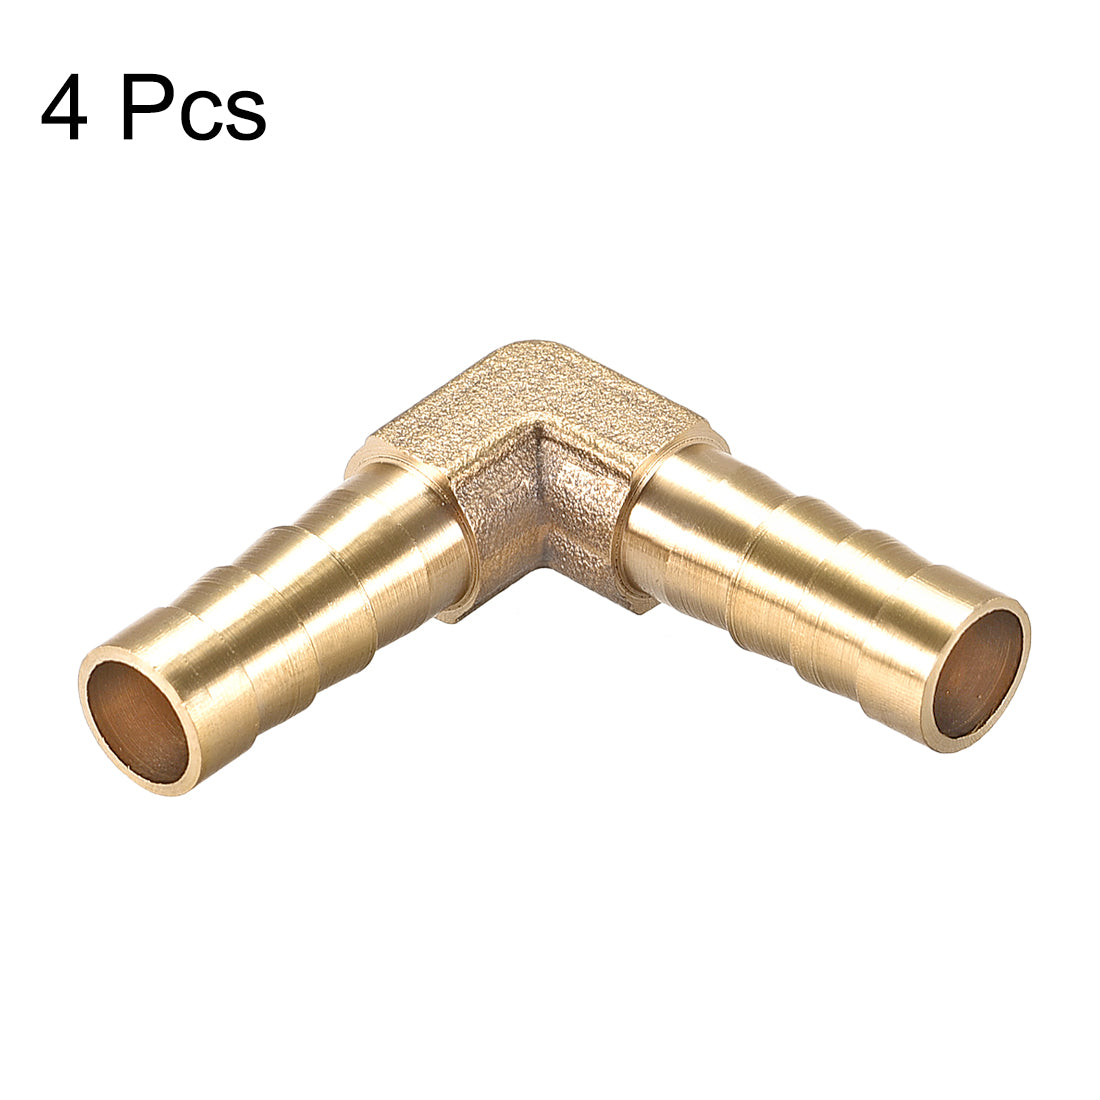 Uxcell Uxcell 8mm Barb Brass Hose Fitting 90 Degree Elbow Pipe Connector Coupler Tubing 4pcs